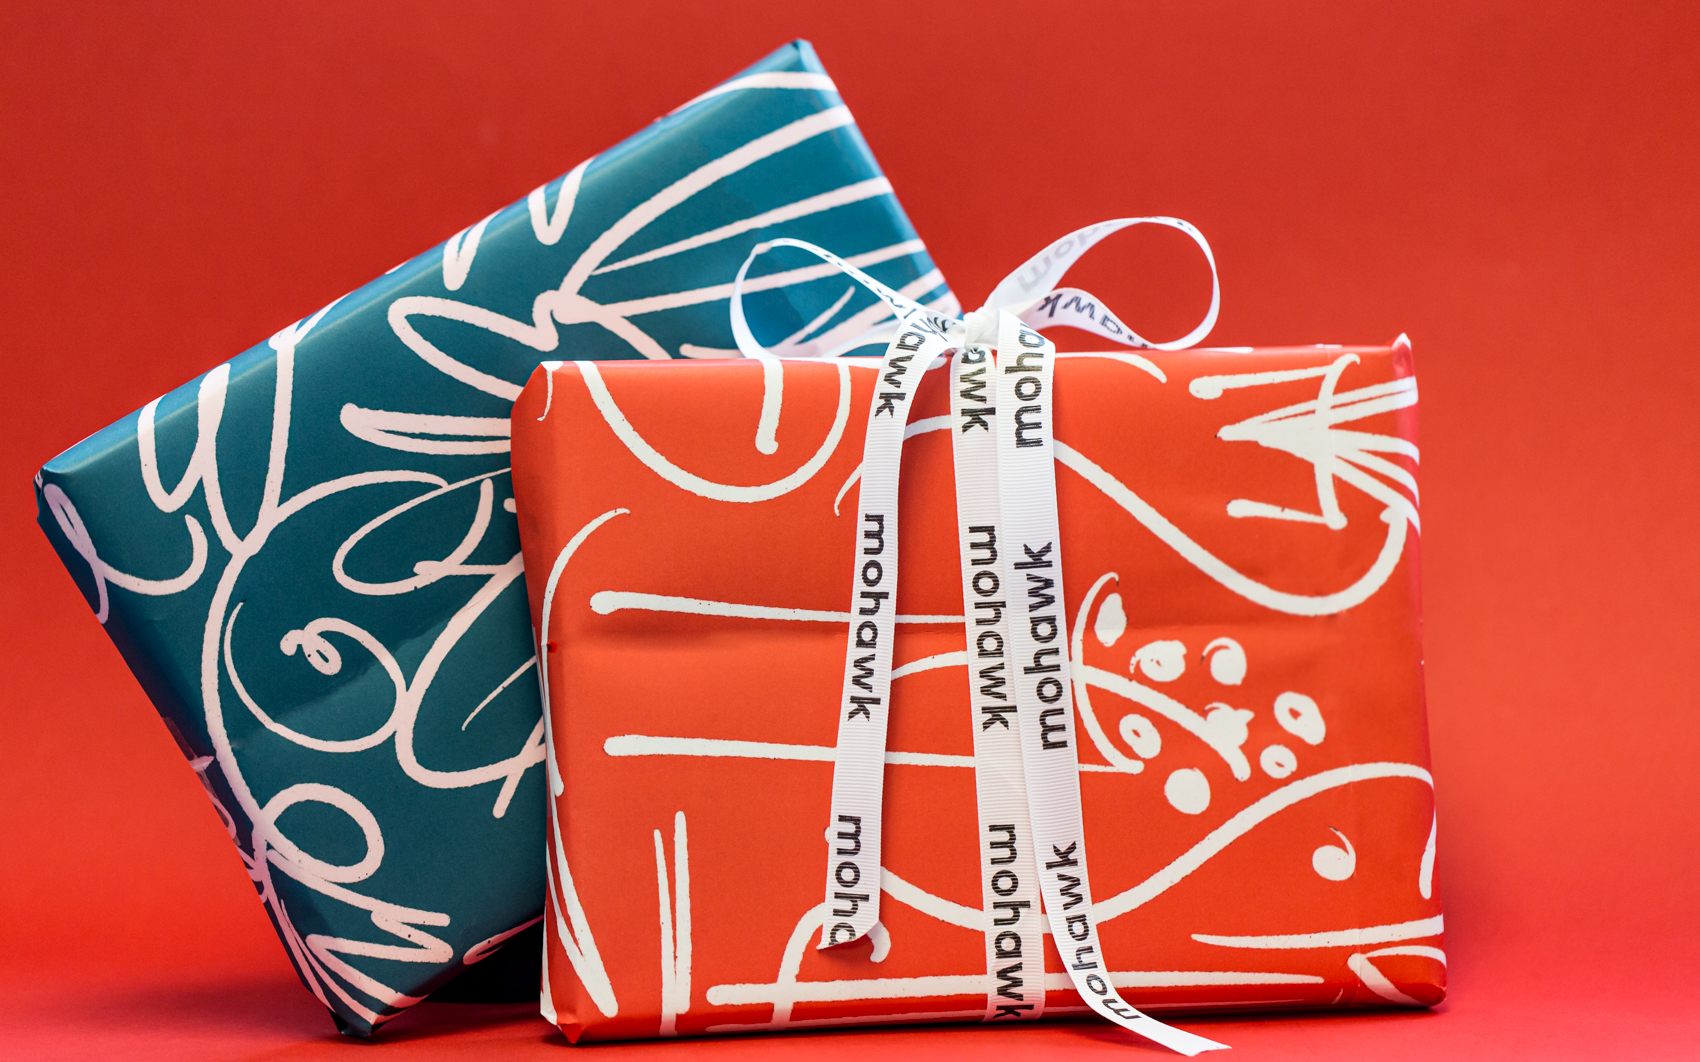 Wrapped gifts using Dutch & Deckle Colors